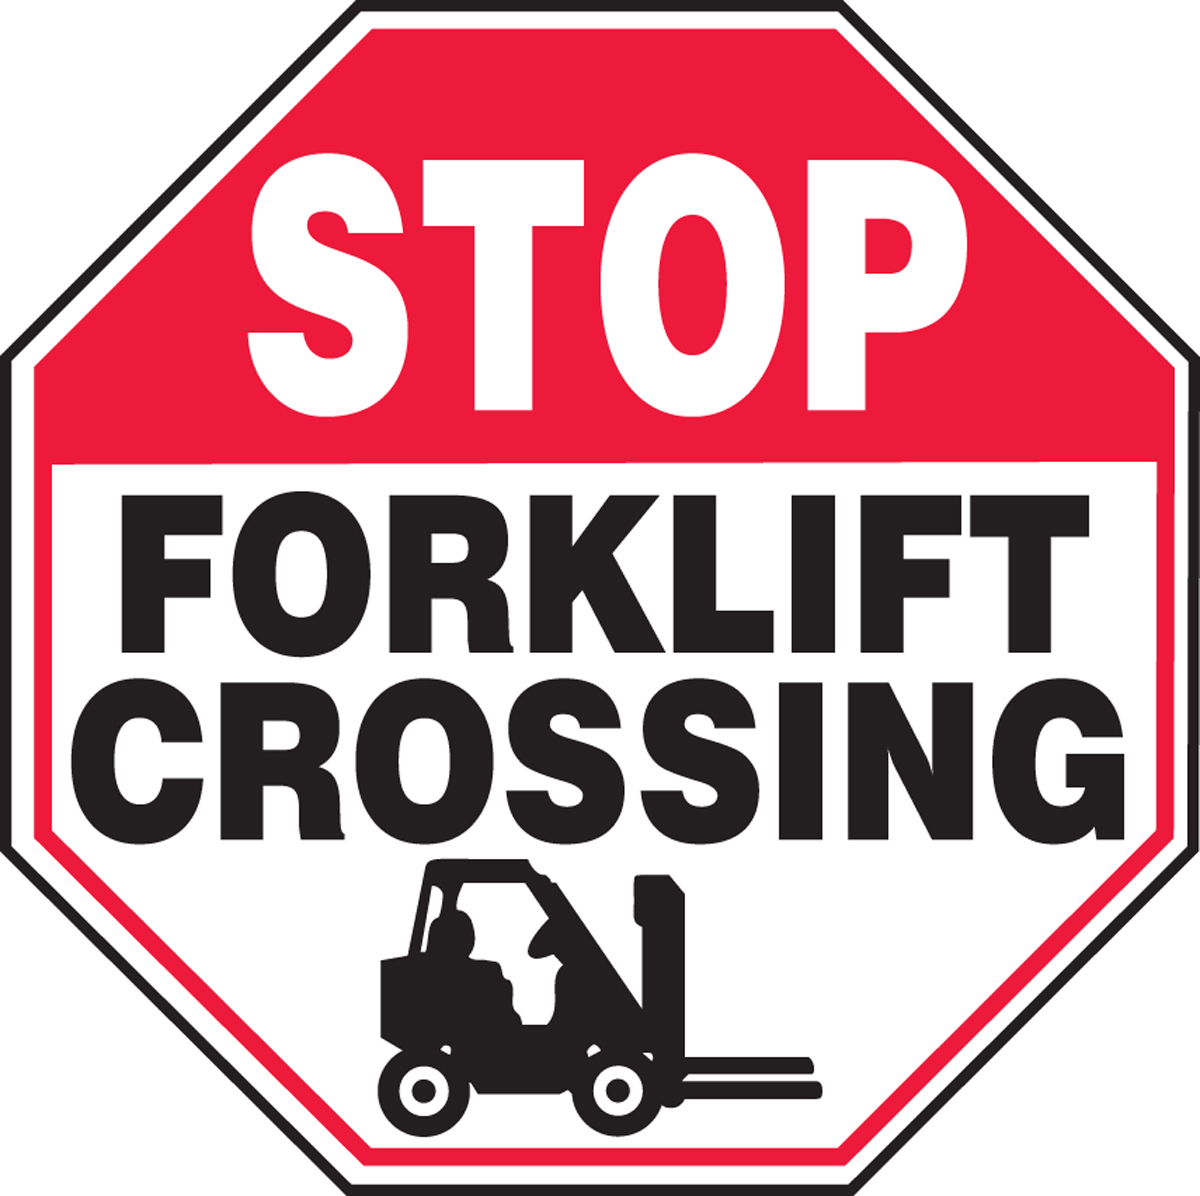 STOP FORKLIFT CROSSING (W/GRAPHIC)